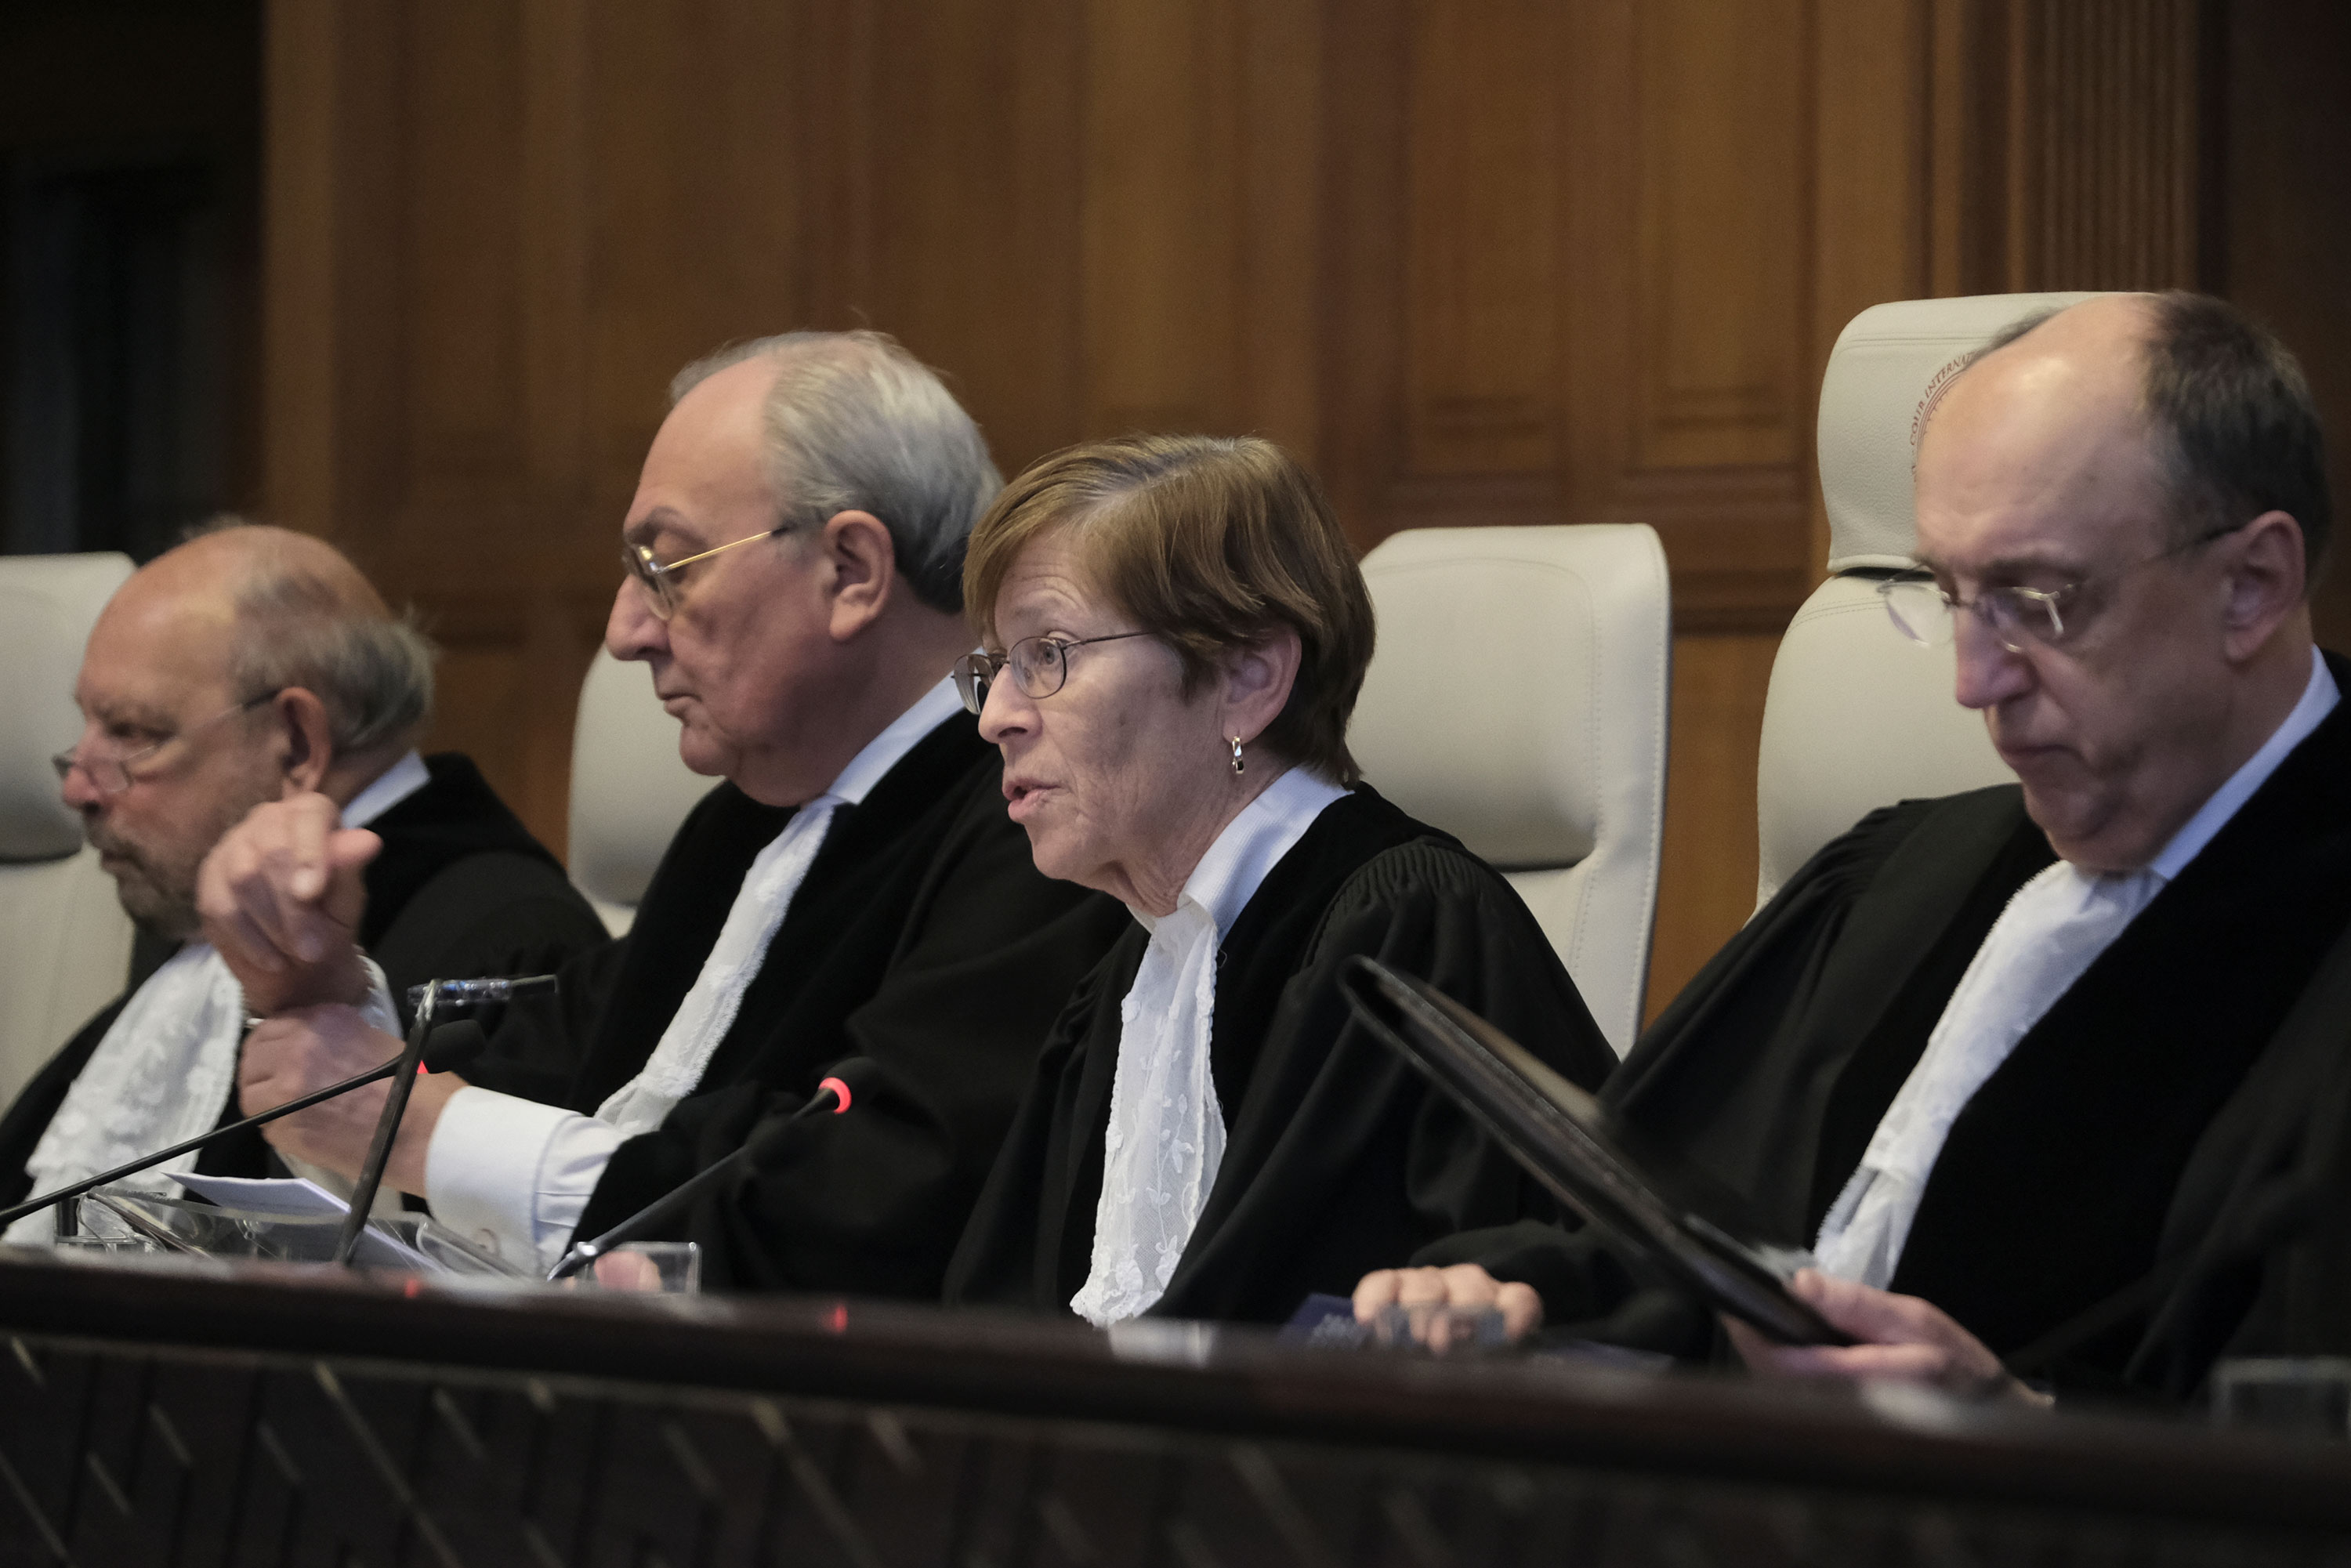 Judge Joan Donoghue speaks at the International Court of Justice in The Hague, Netherlands, on Friday.